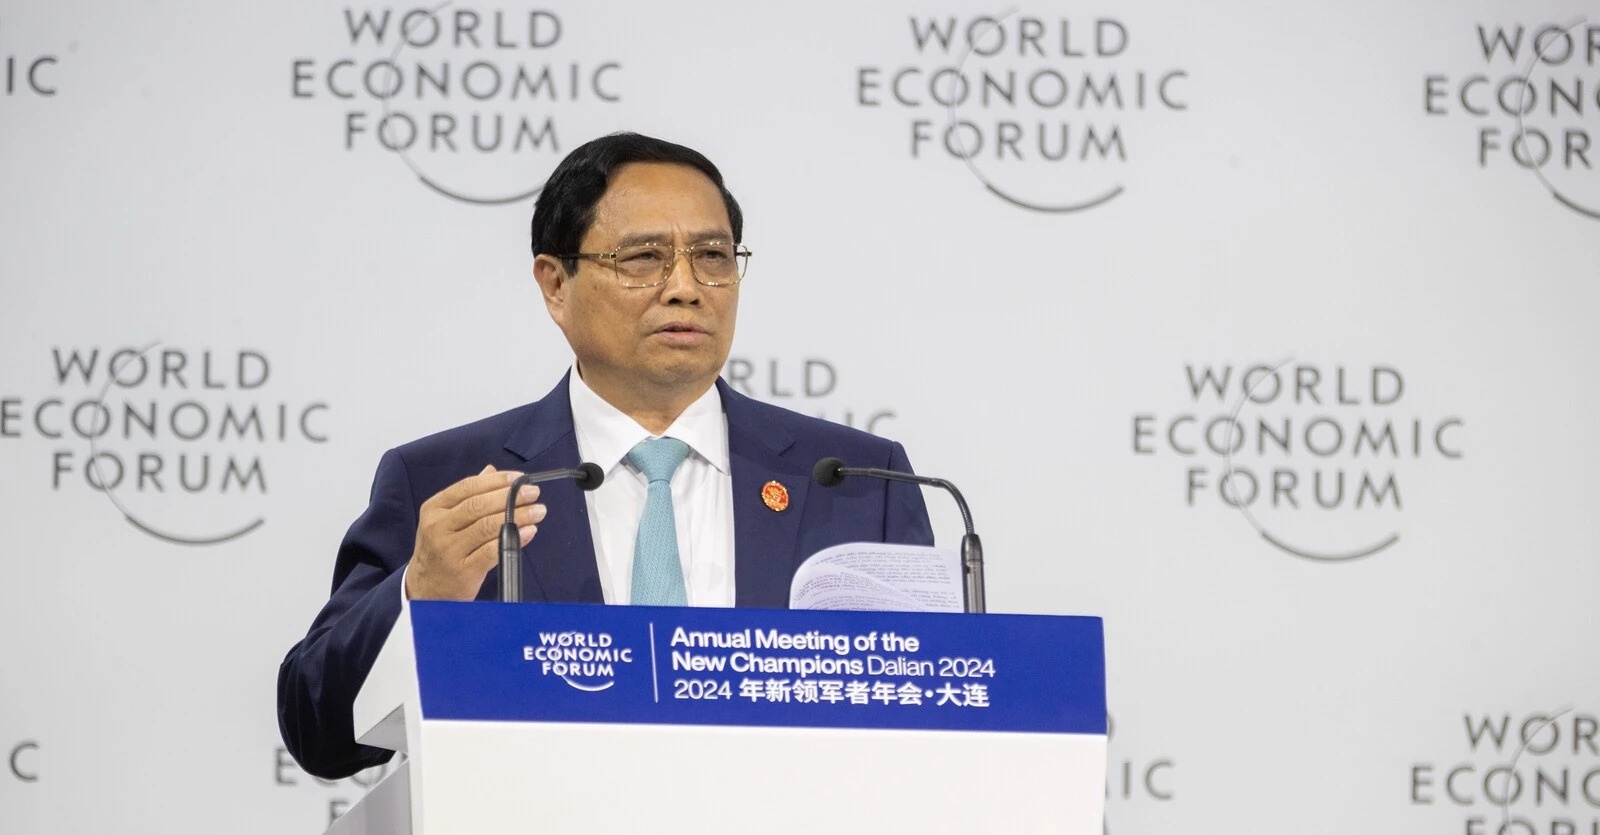 Vietnam will deepen bonds with China and WEF, says PM